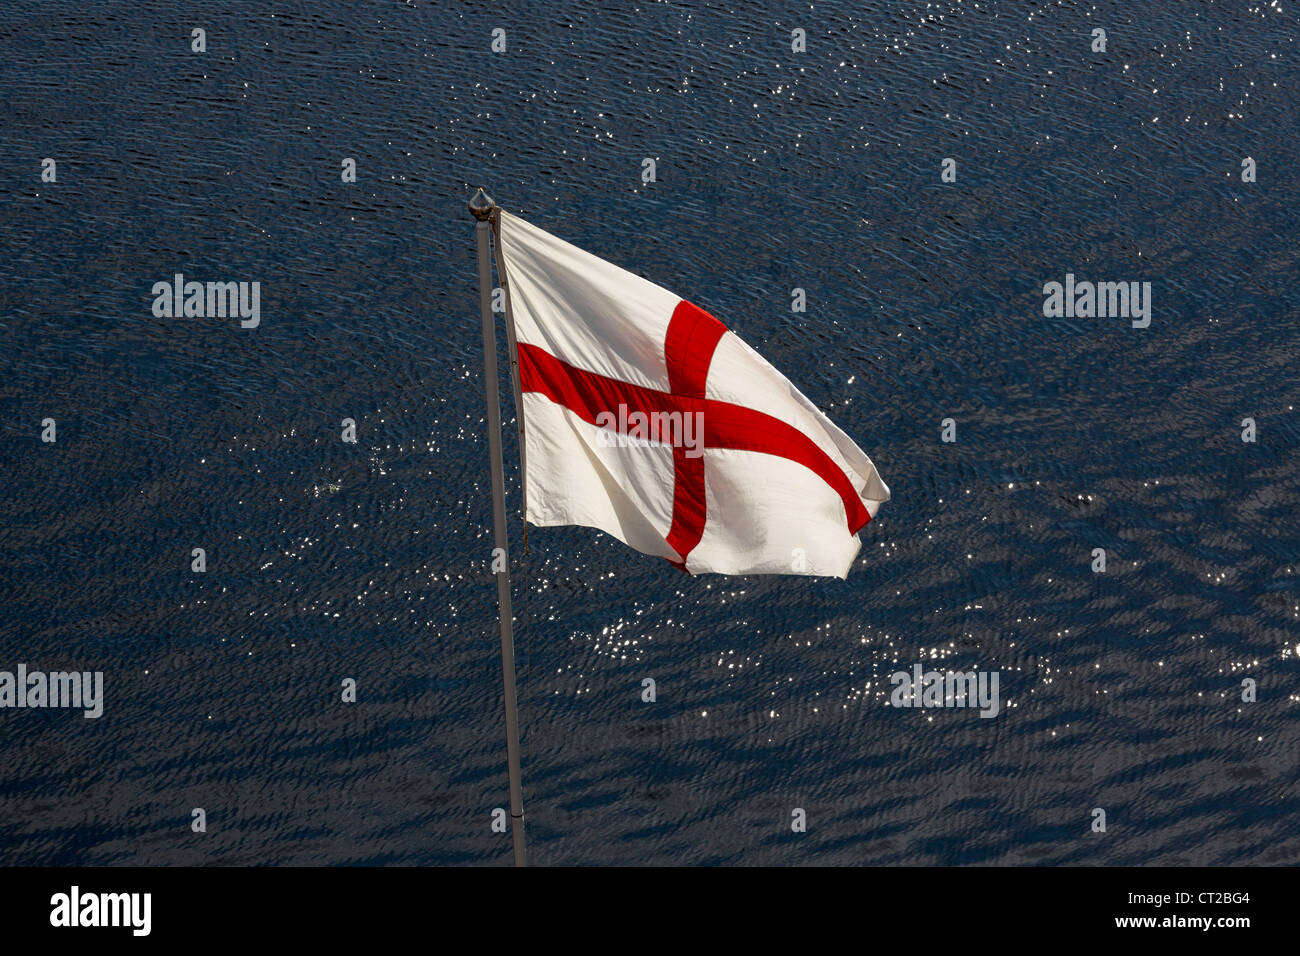 the cross of st George, the national flag of England Stock Photo